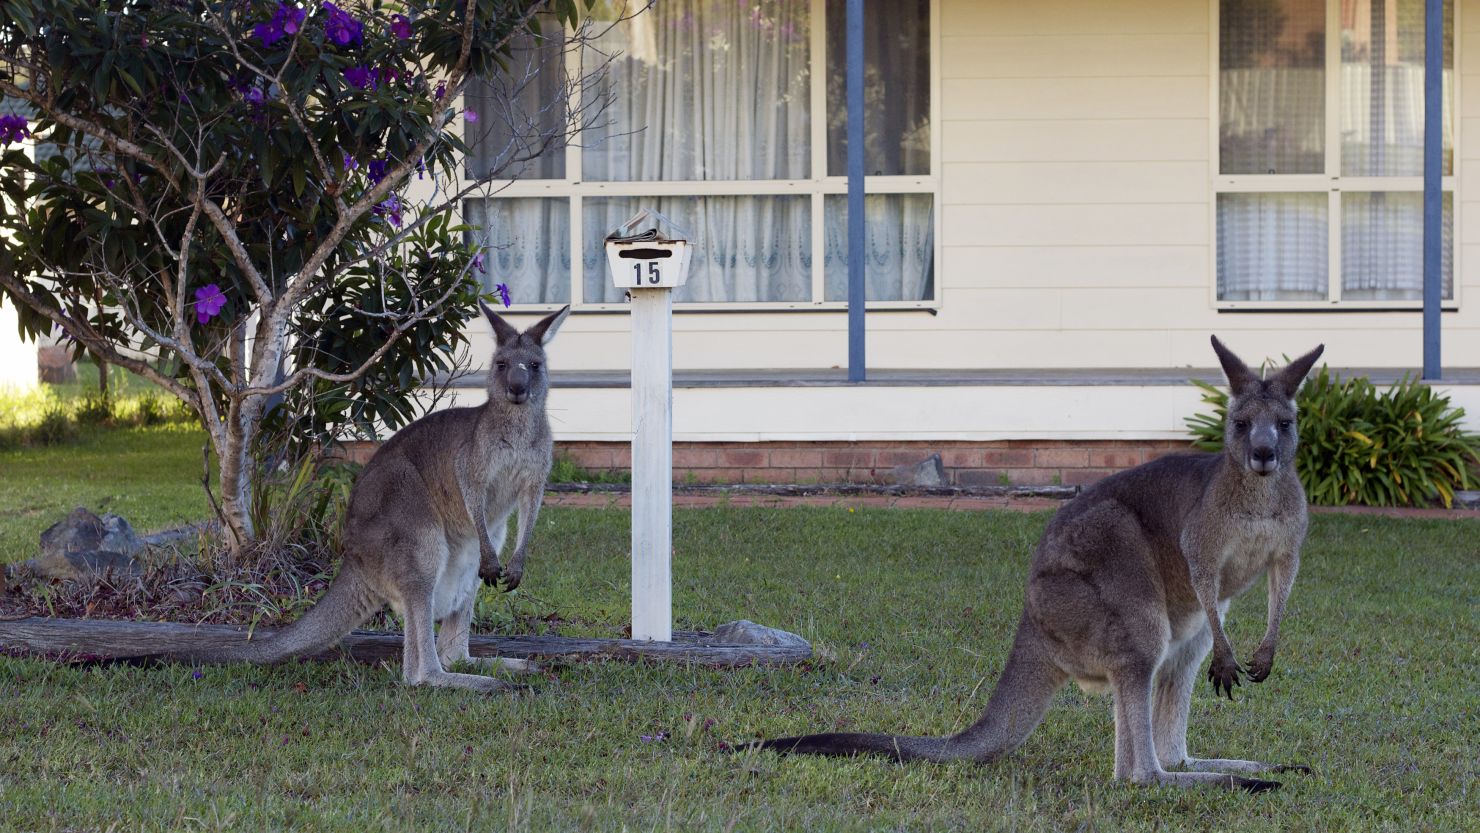 Eastern Grey Kangaroos are a common sight in the suburbs of Canberra, Australia's capital.